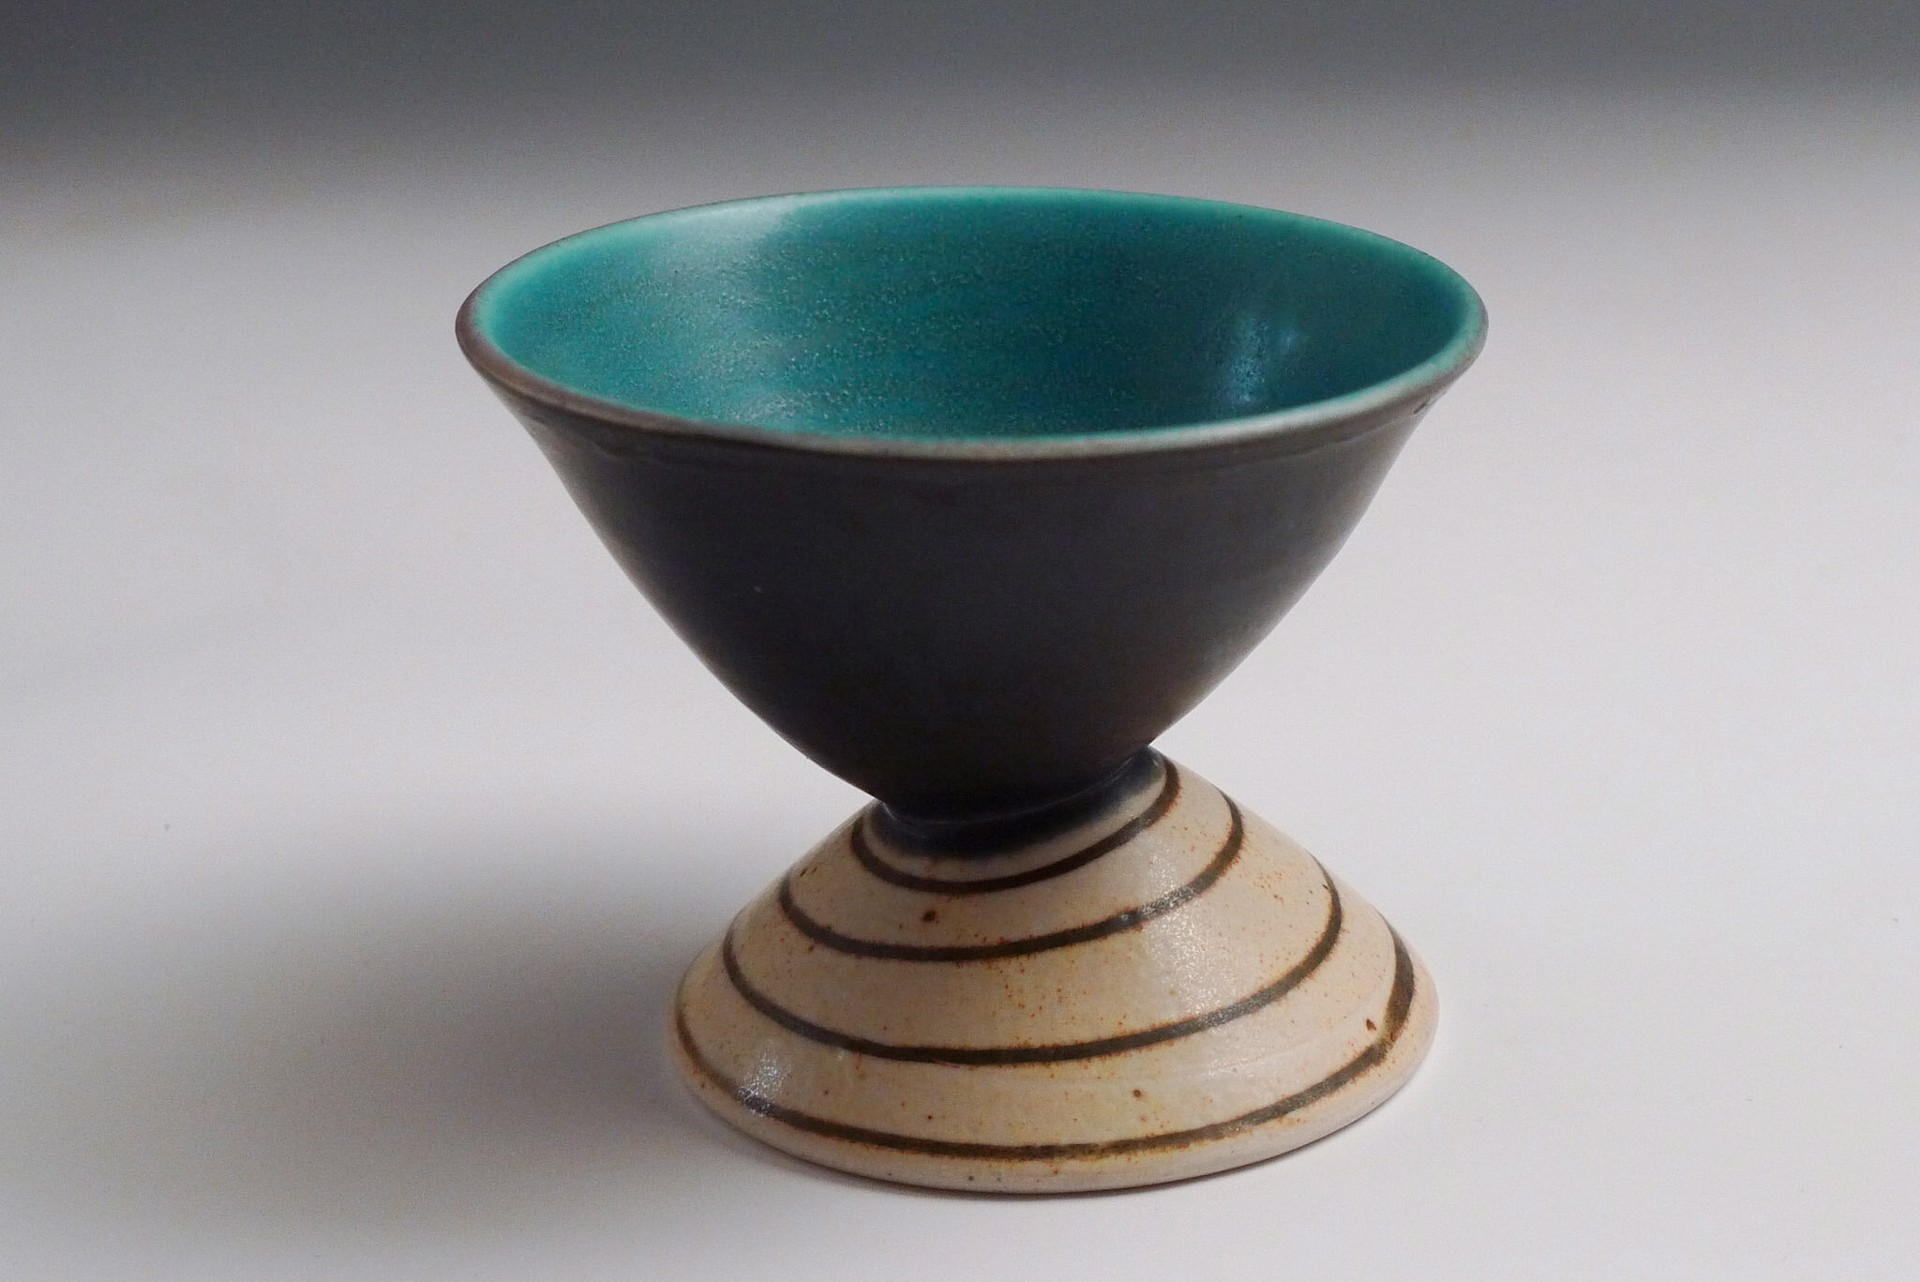 Libations Goblet by Delores Fortuna